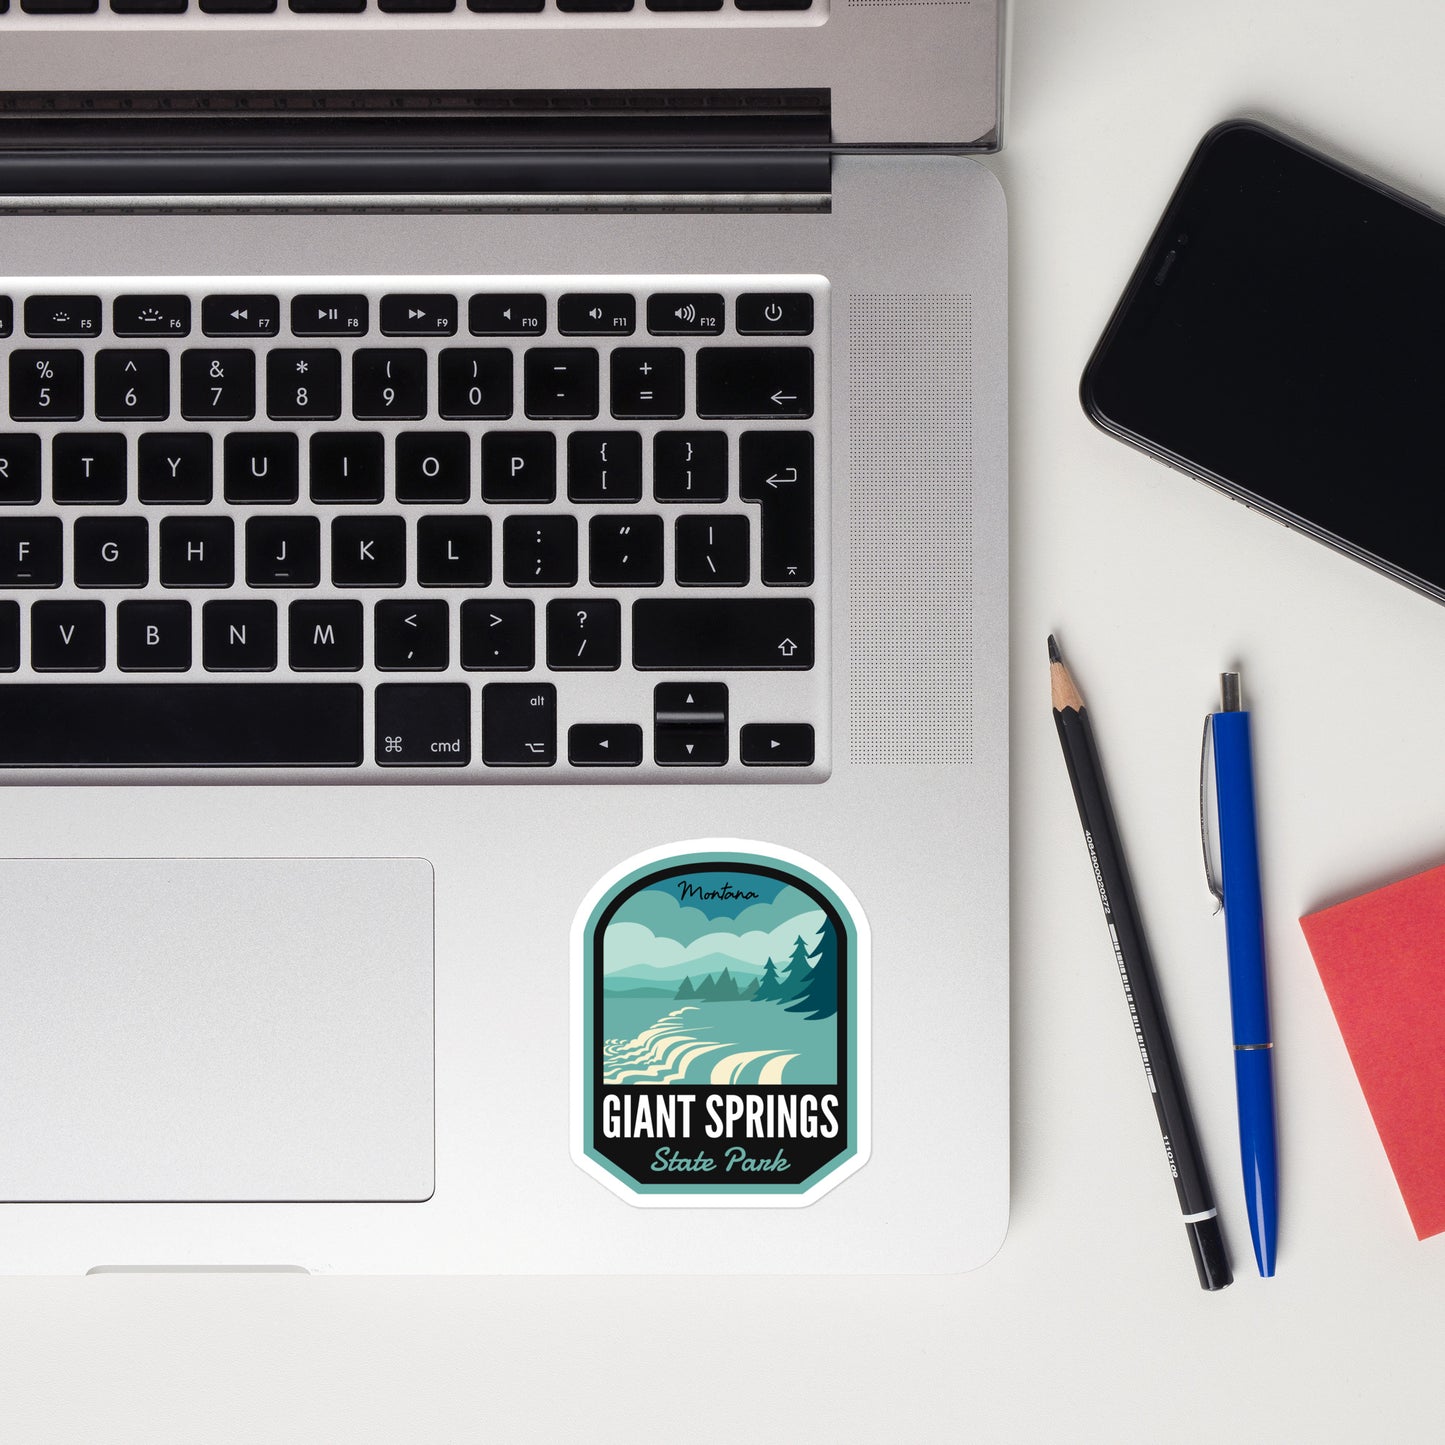 A sticker of Giant Springs State Park on a laptop